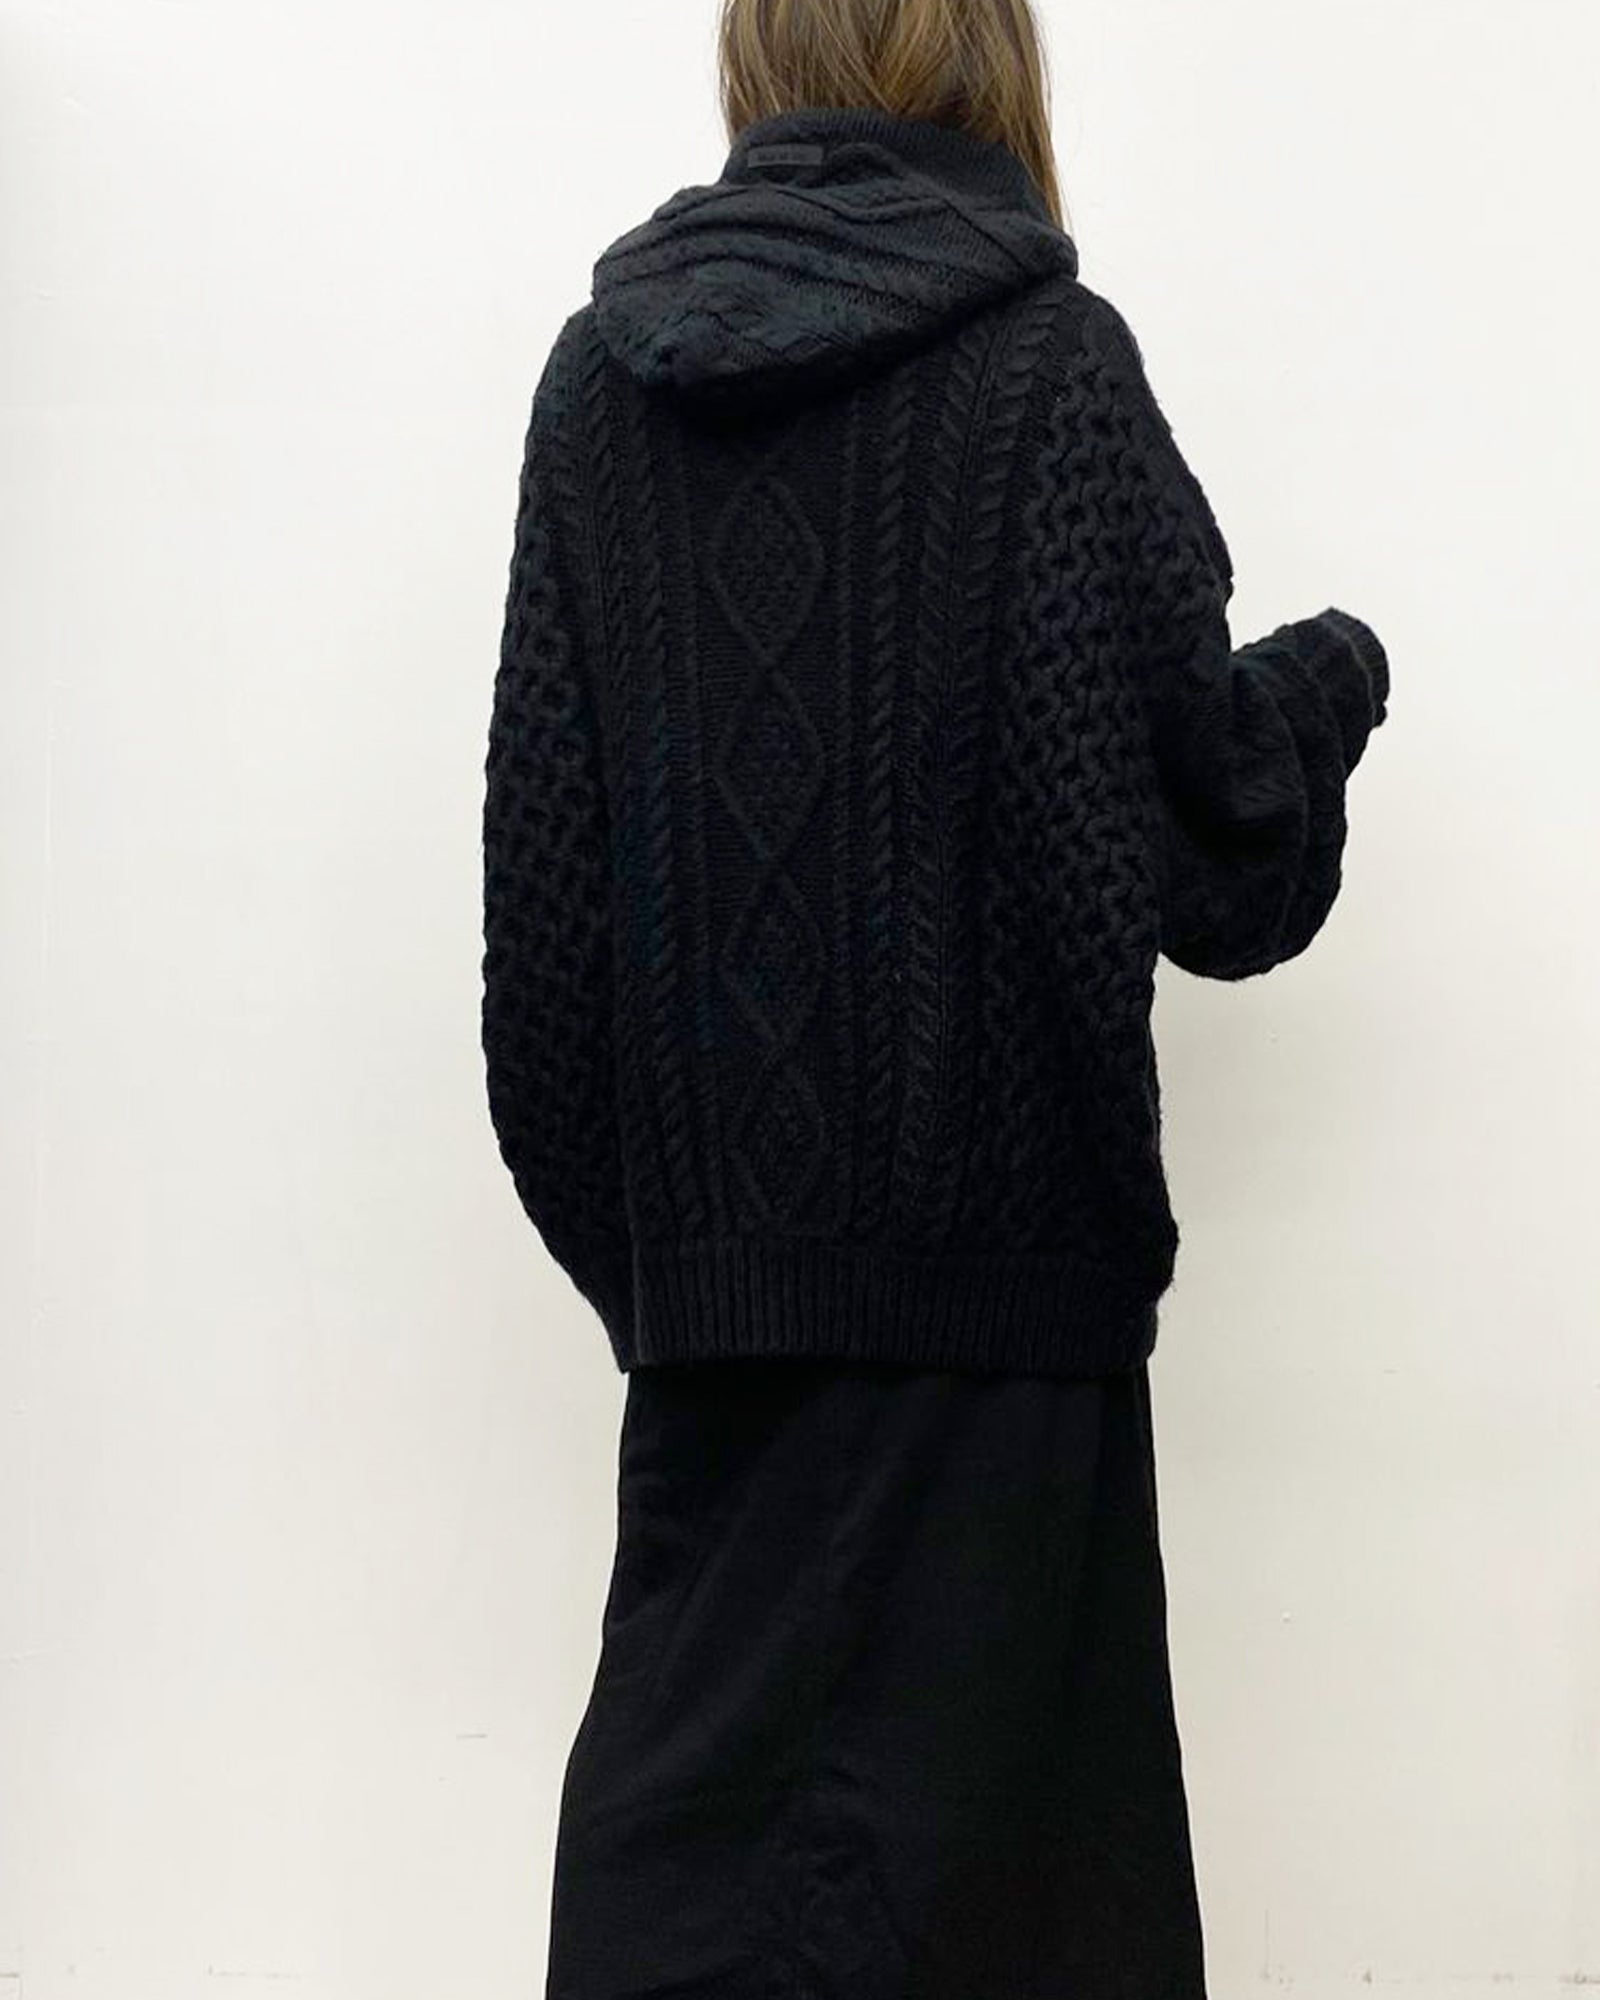 CABLE KNIT HOODIE Jet Black